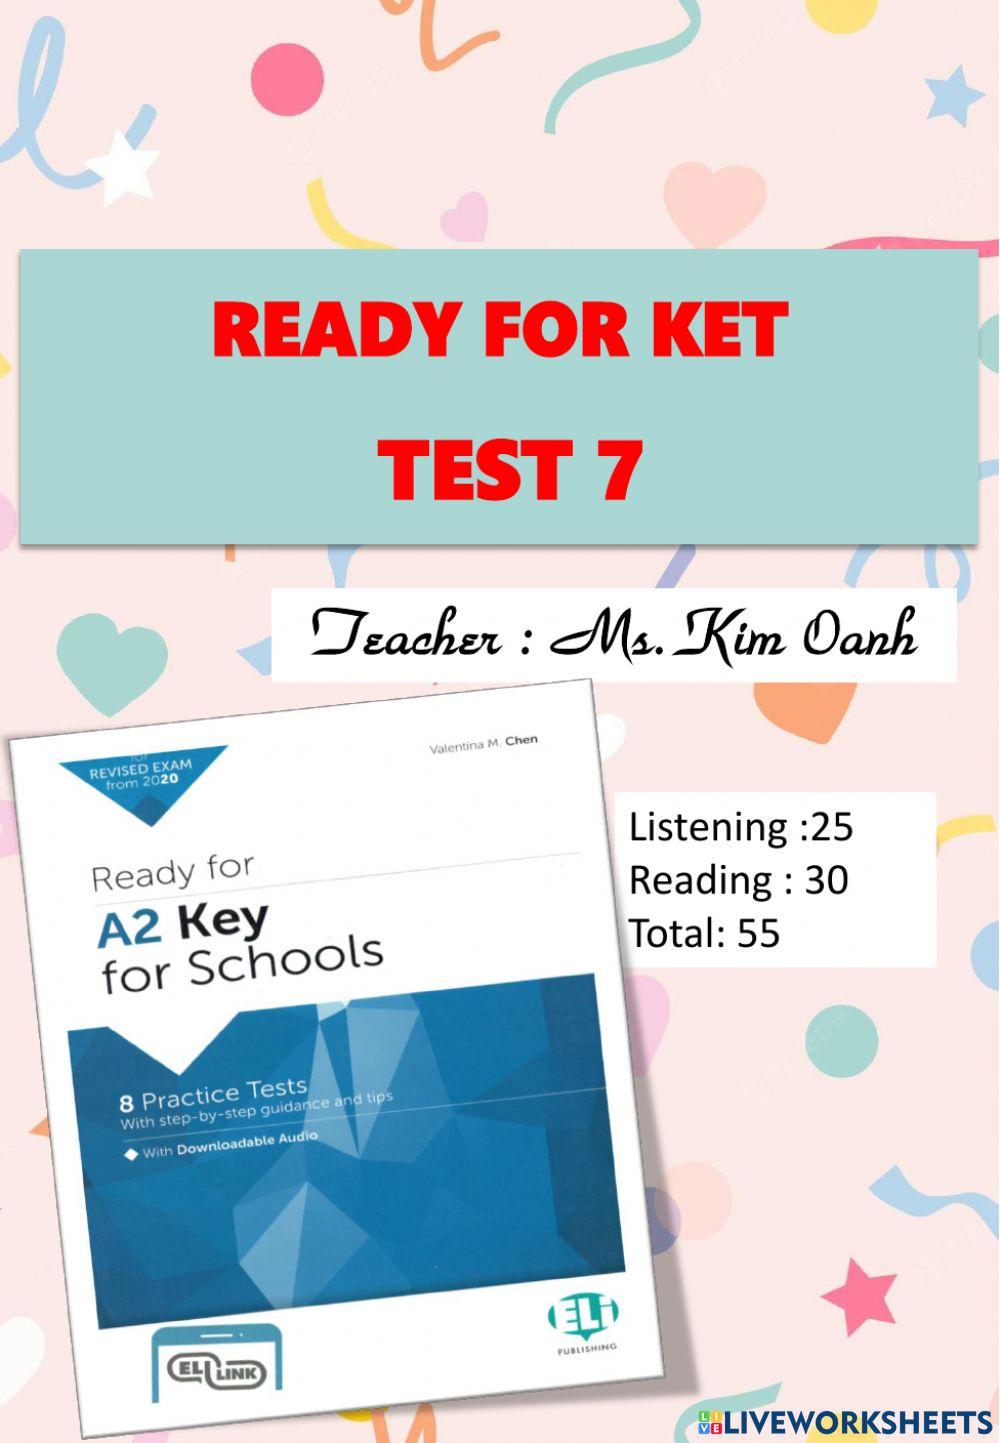 Ready for Ket Test 7